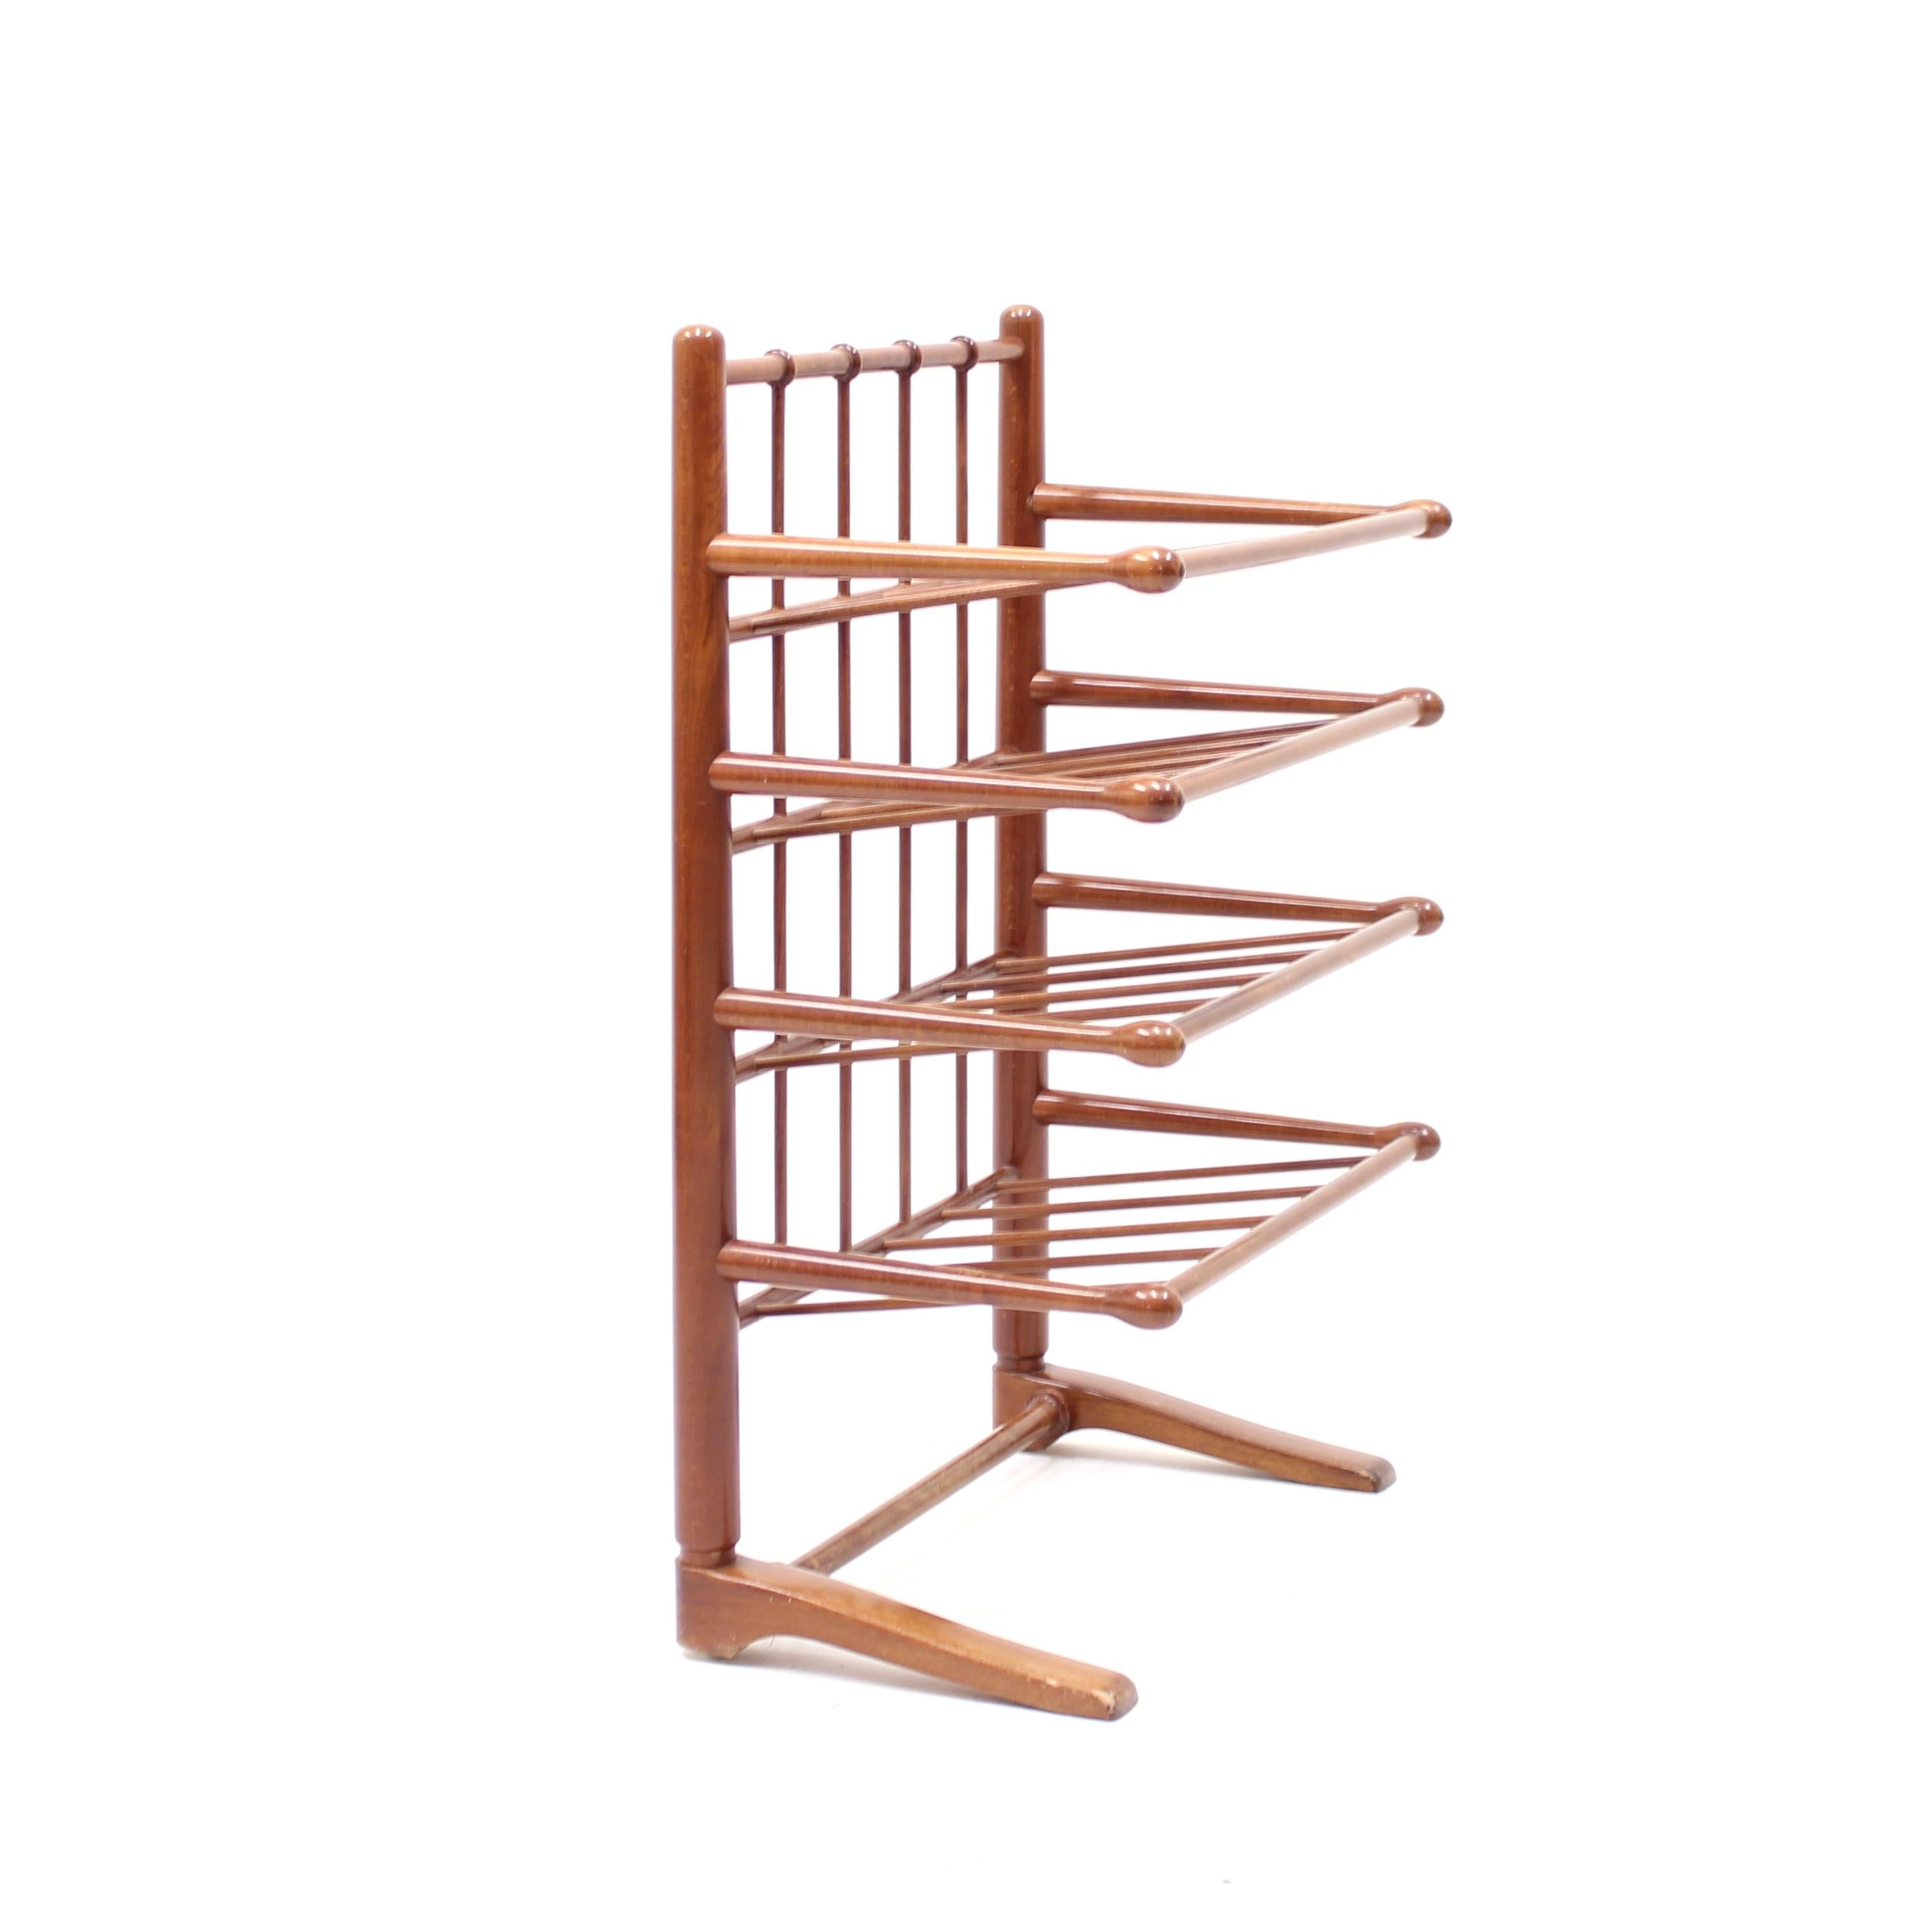 20th Century Mahogany Magazin or Note Rack, Attributed to Josef Frank, 1950s